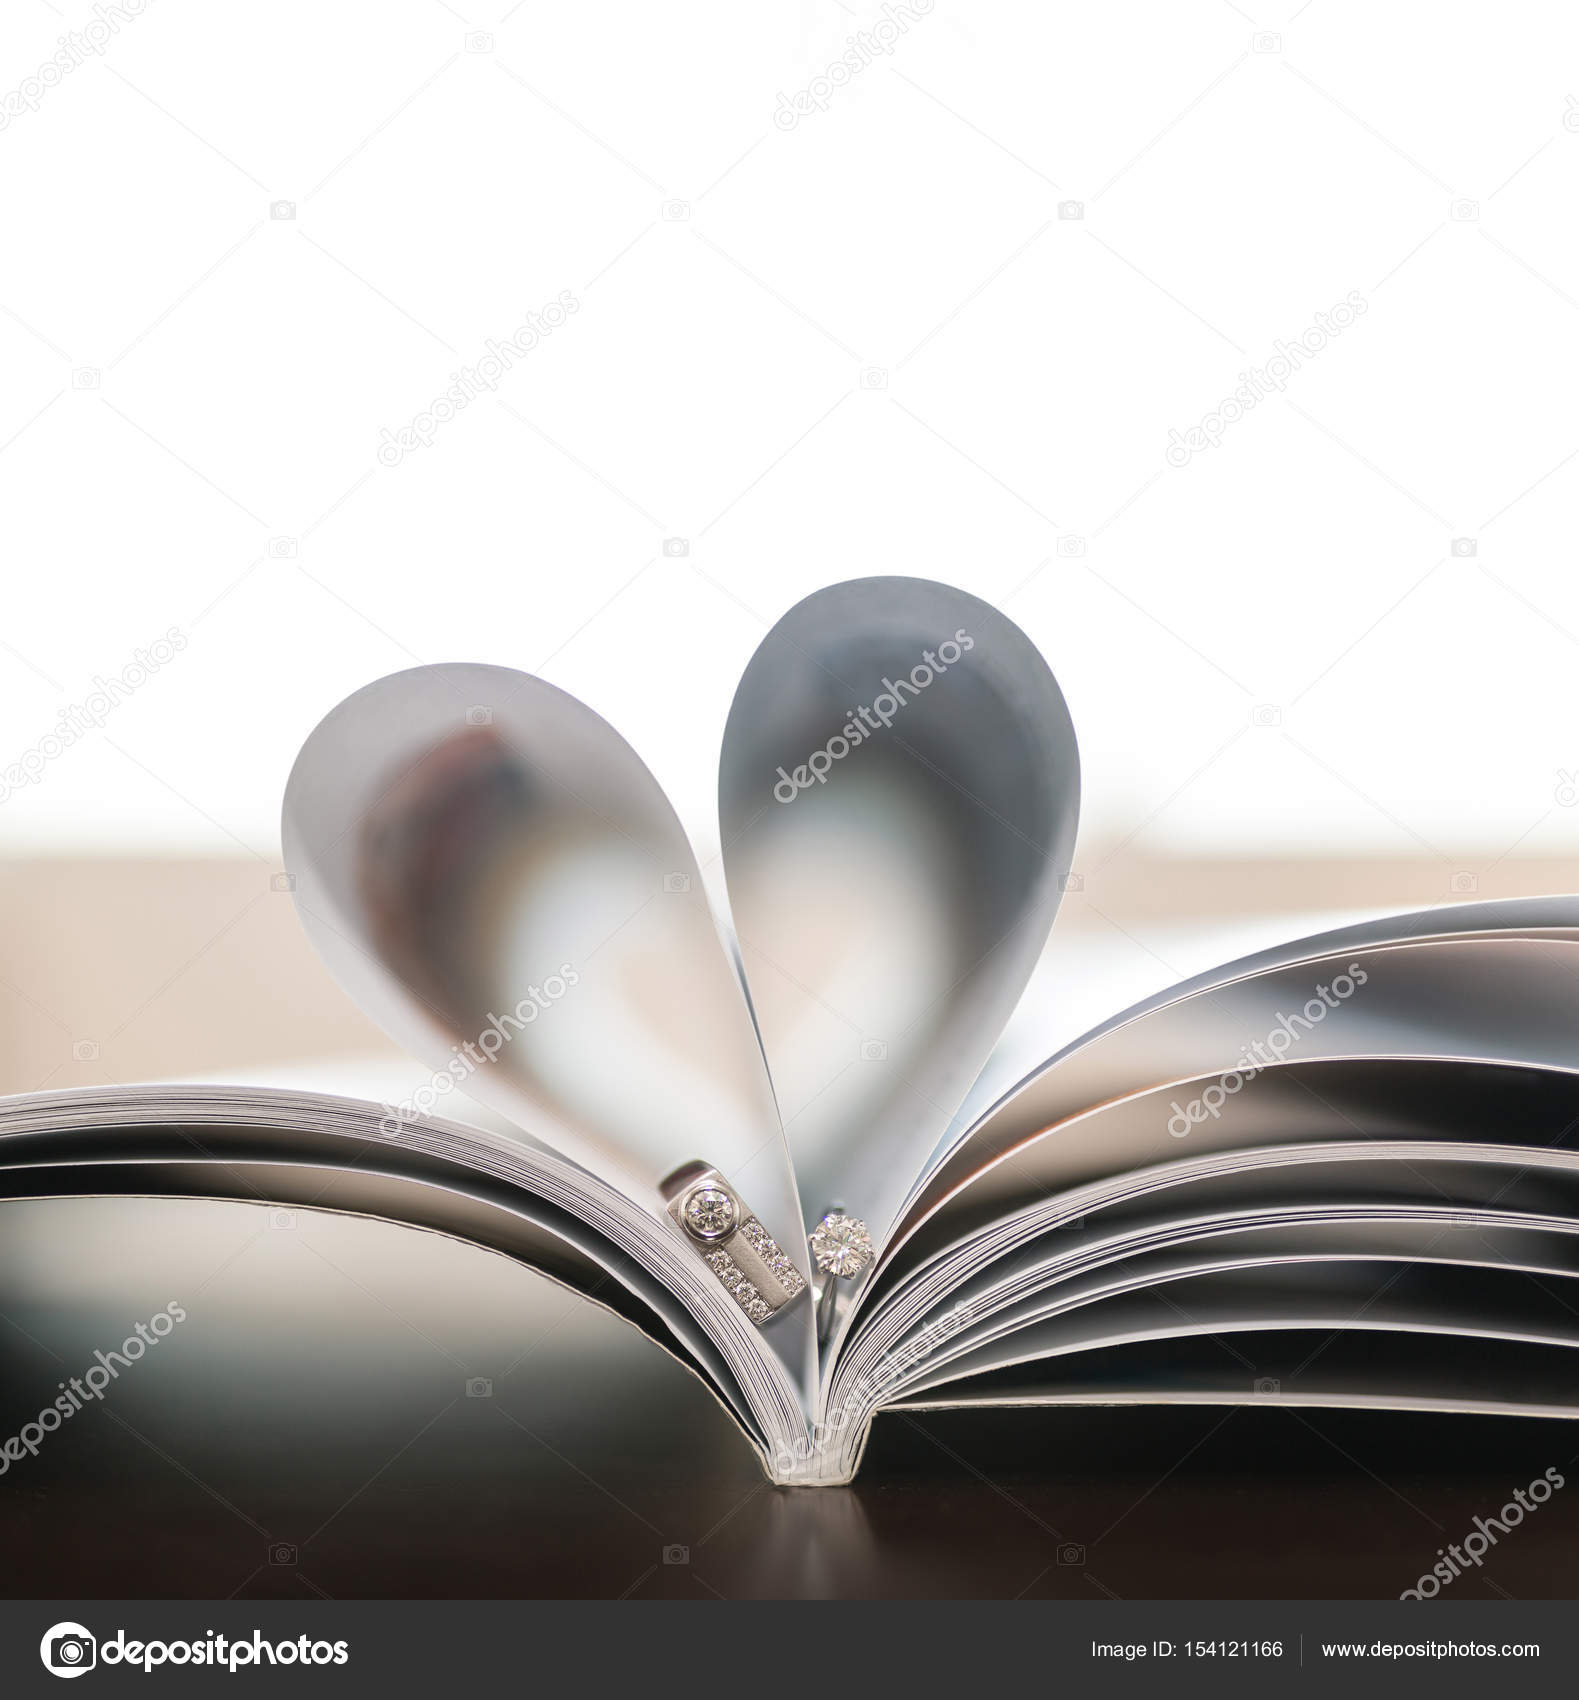 Pages of book curved into heart shape with couple wedding rings ...